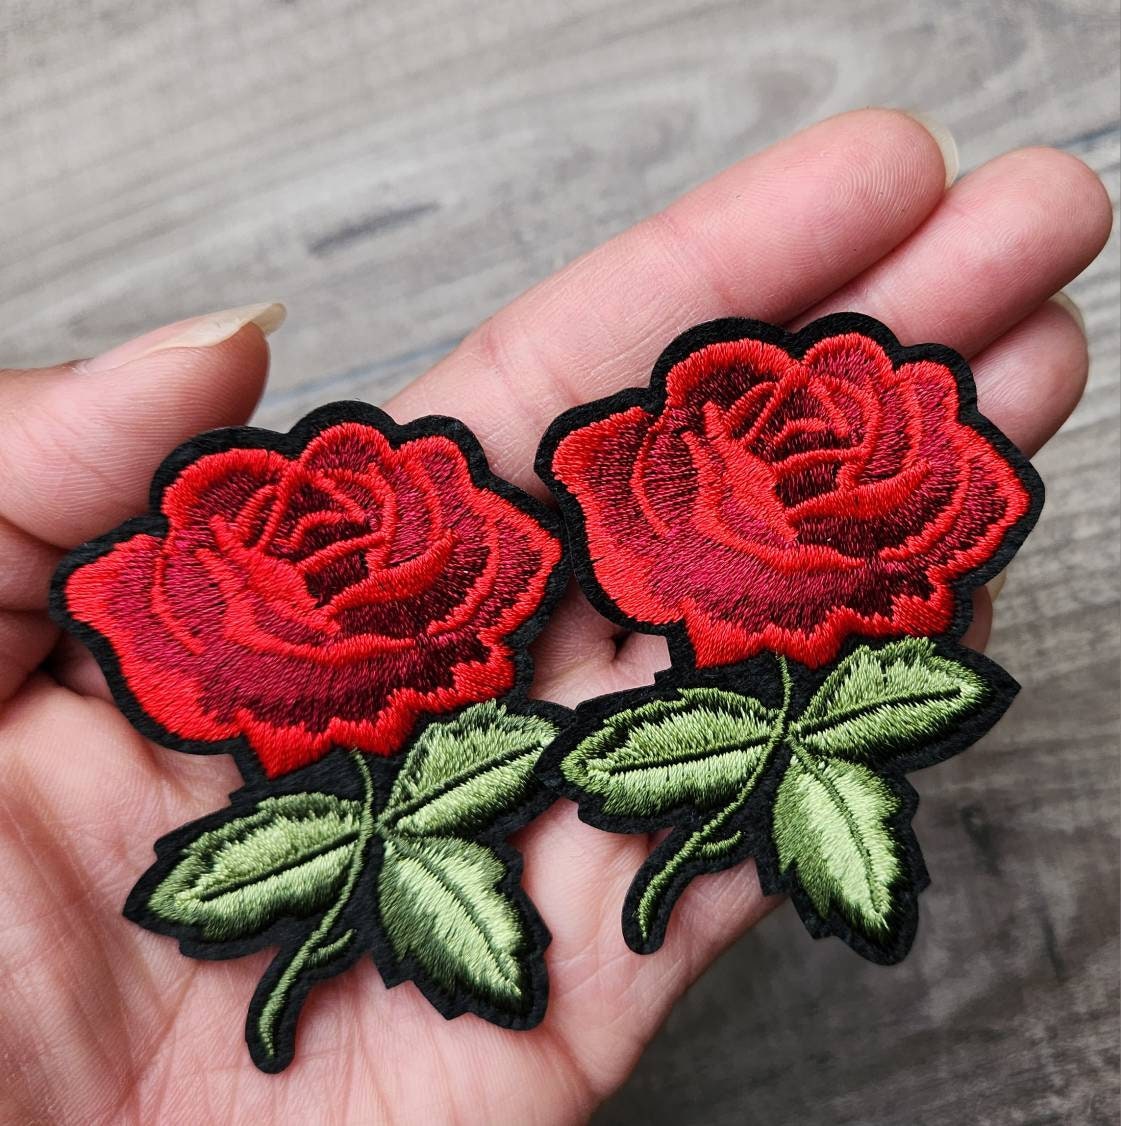 U-Sky Sew or Iron on Patches - Cute Red Flower Rose Patch for